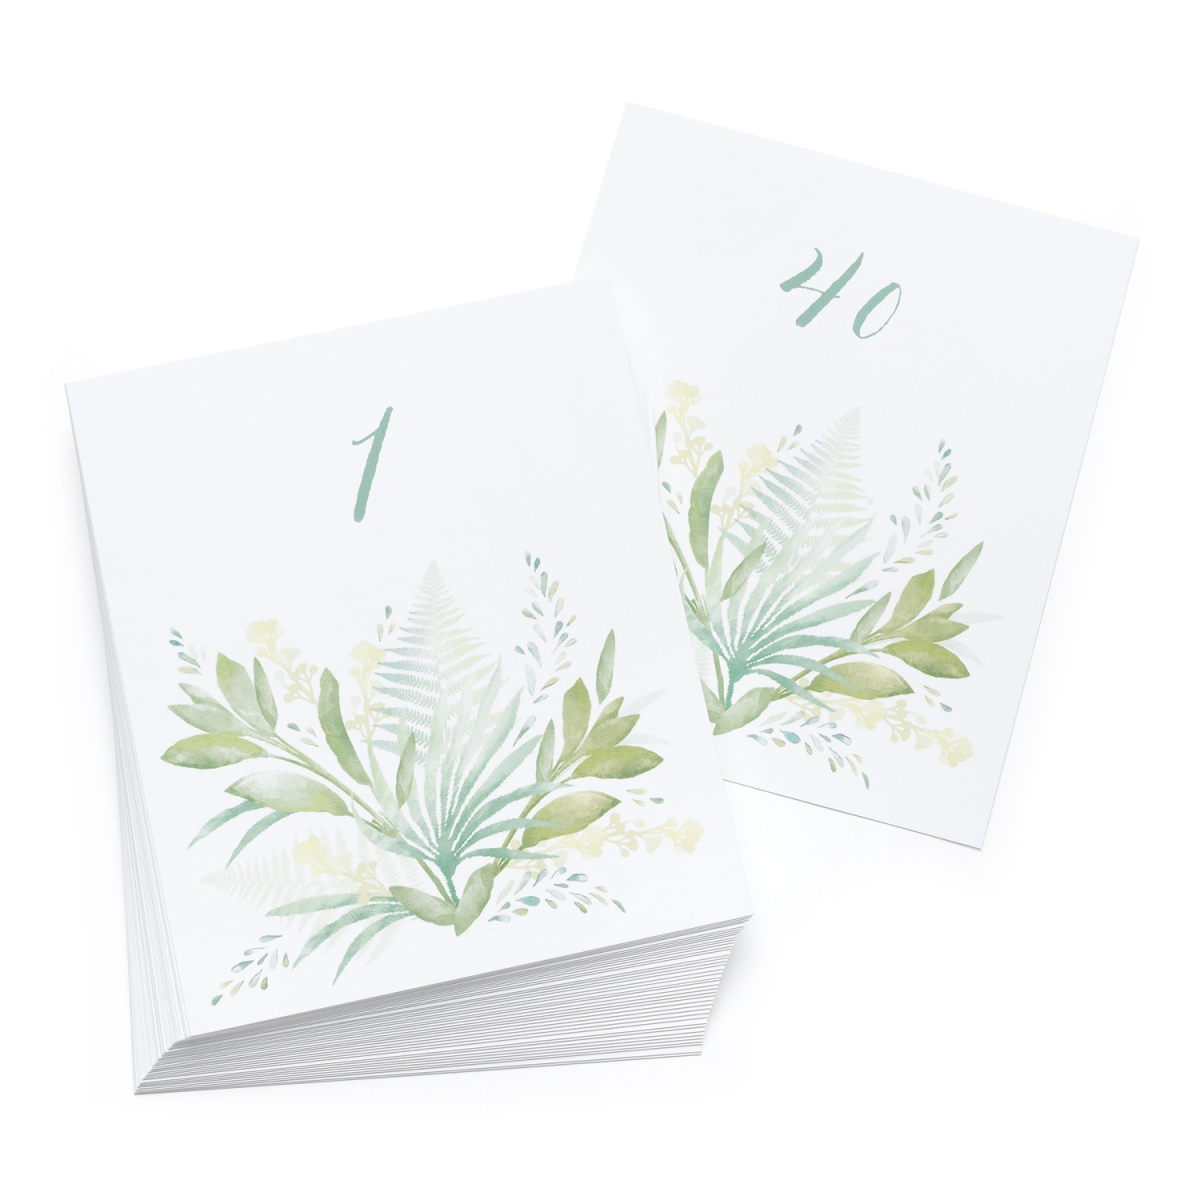 Picture of Hortense B. Hewitt 55504 Greenery Table Number Cards - Pack of 40